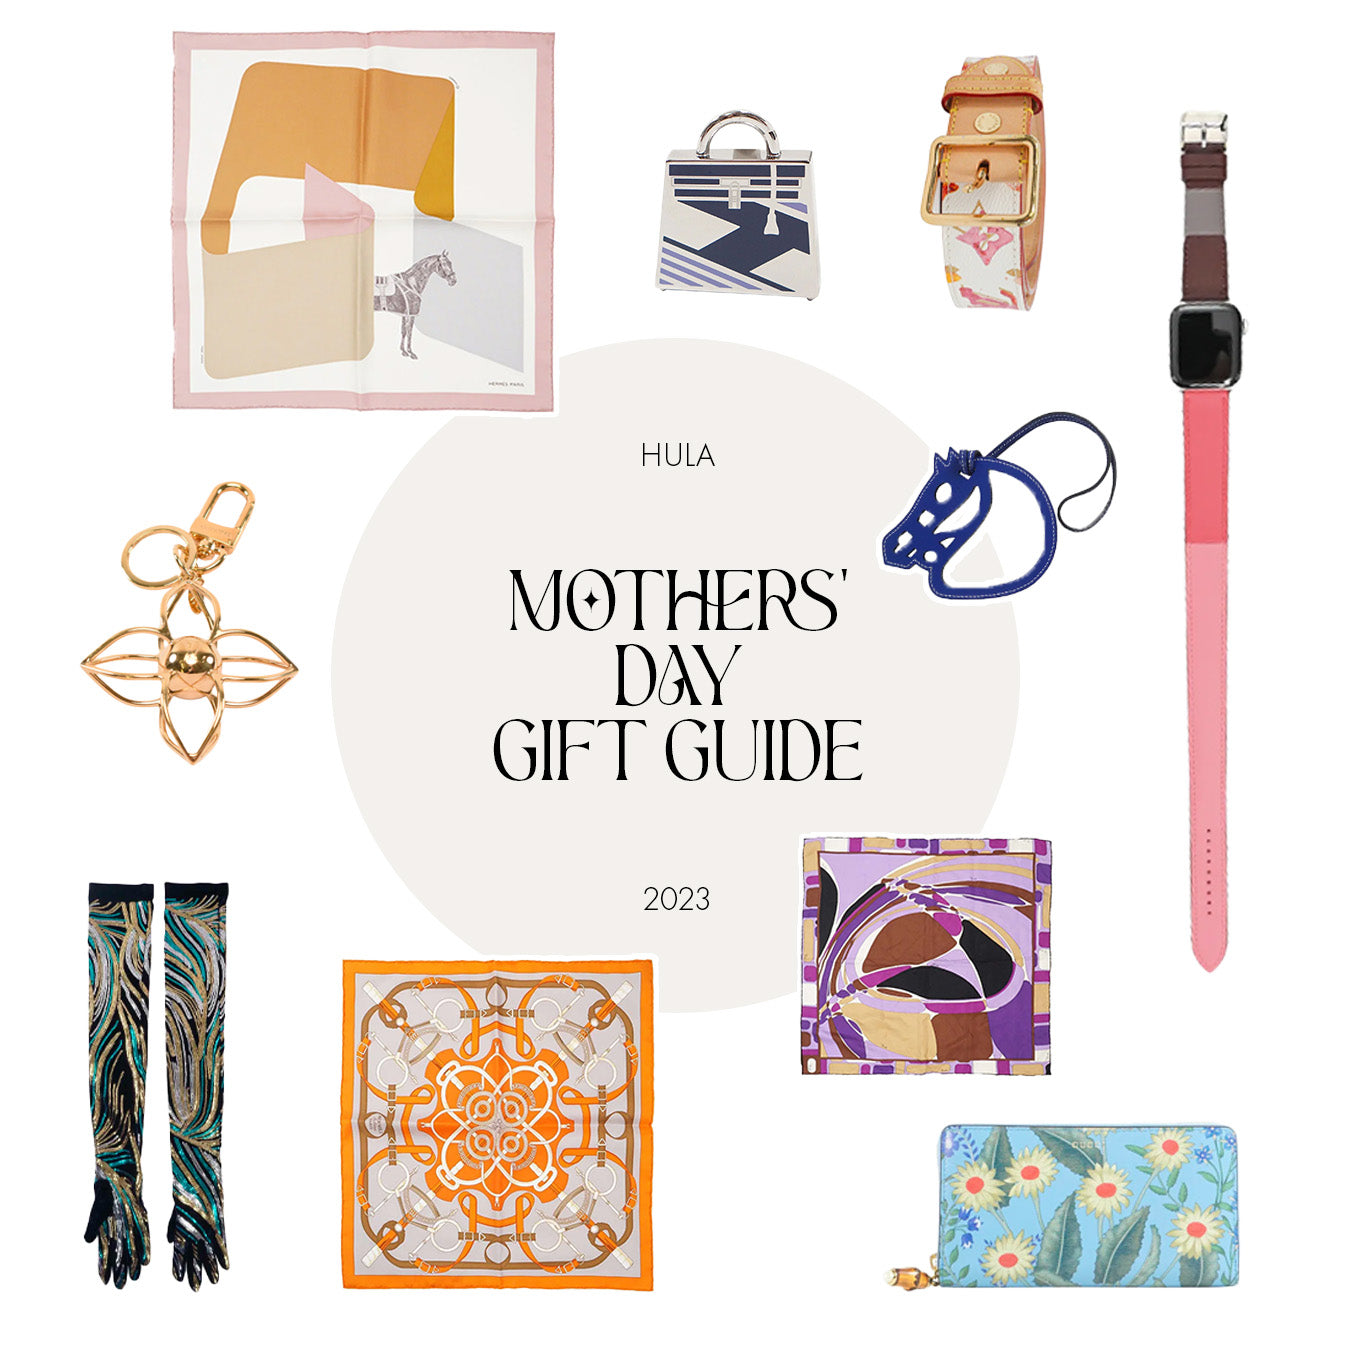 Mothers' Day Gift Guide 2023